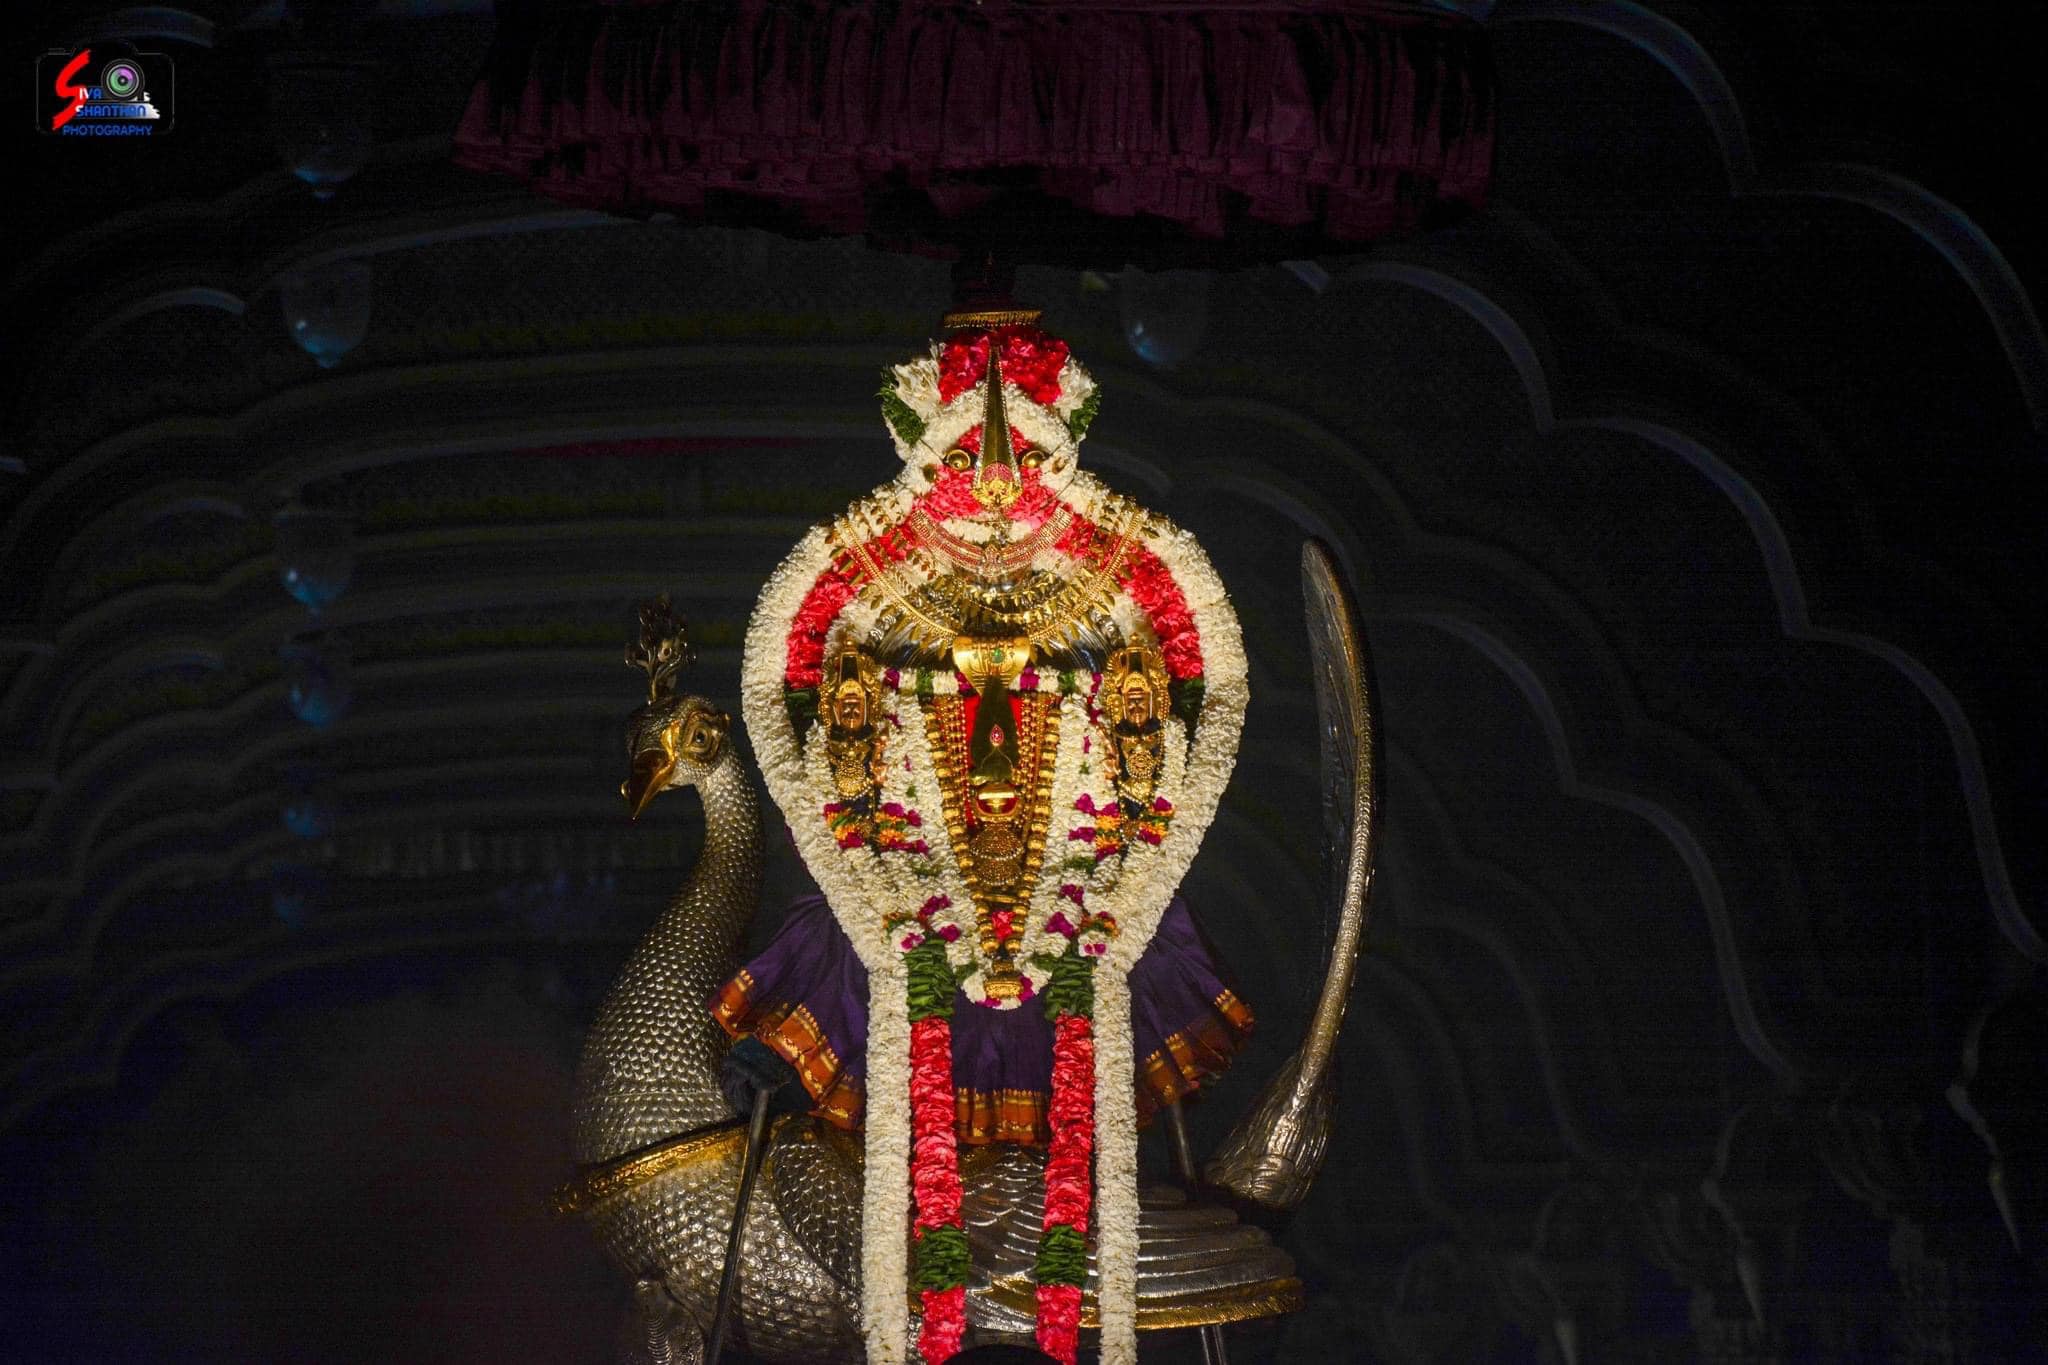 Kandaswamy Temple was founded in 948 ad